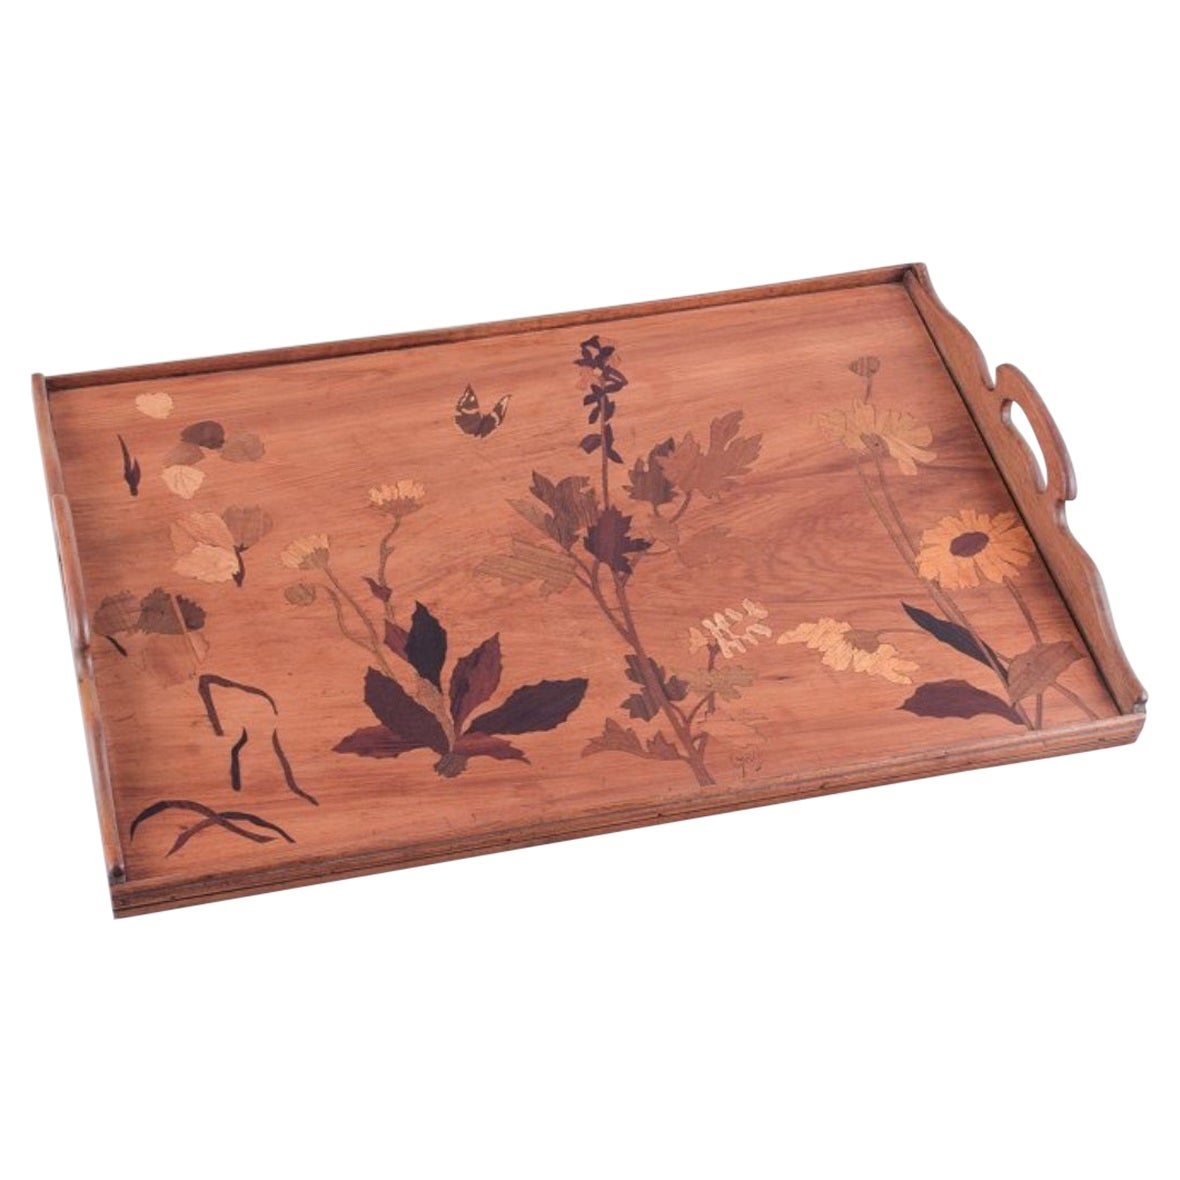 Emile Gallé. Large tray made of fruitwood. Inlaid with floral motifs. For Sale